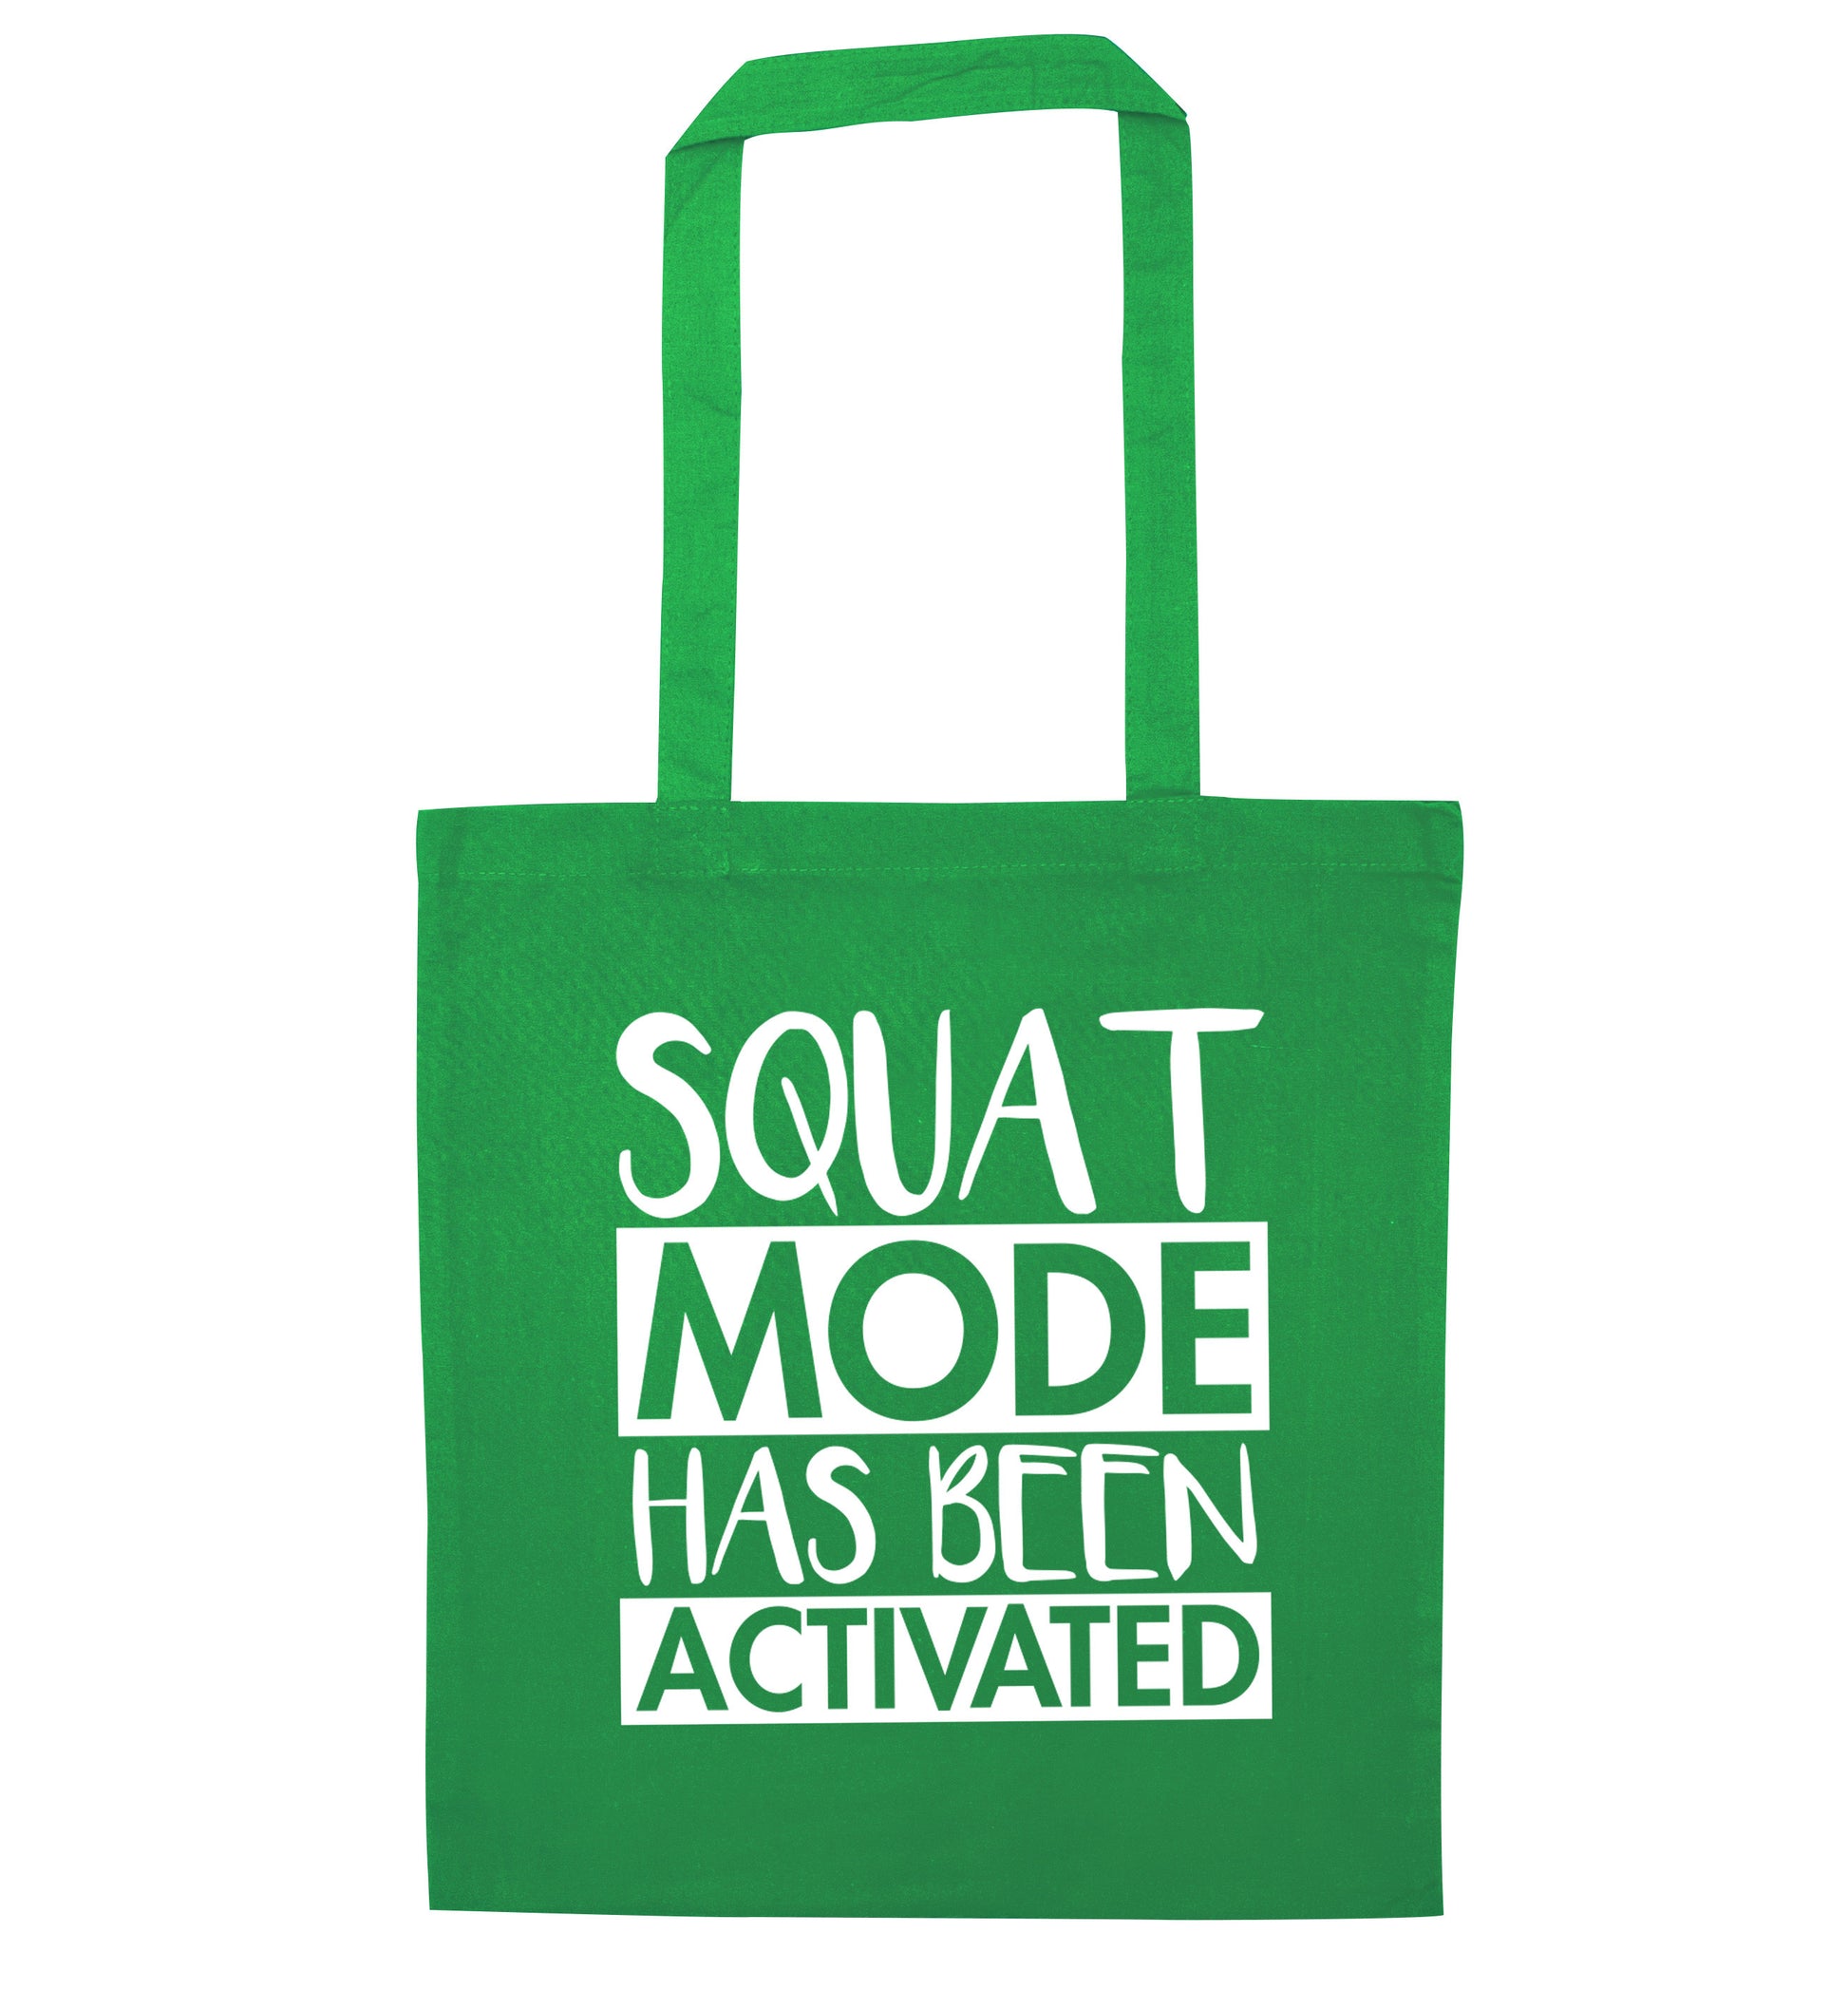 Squat mode activated green tote bag